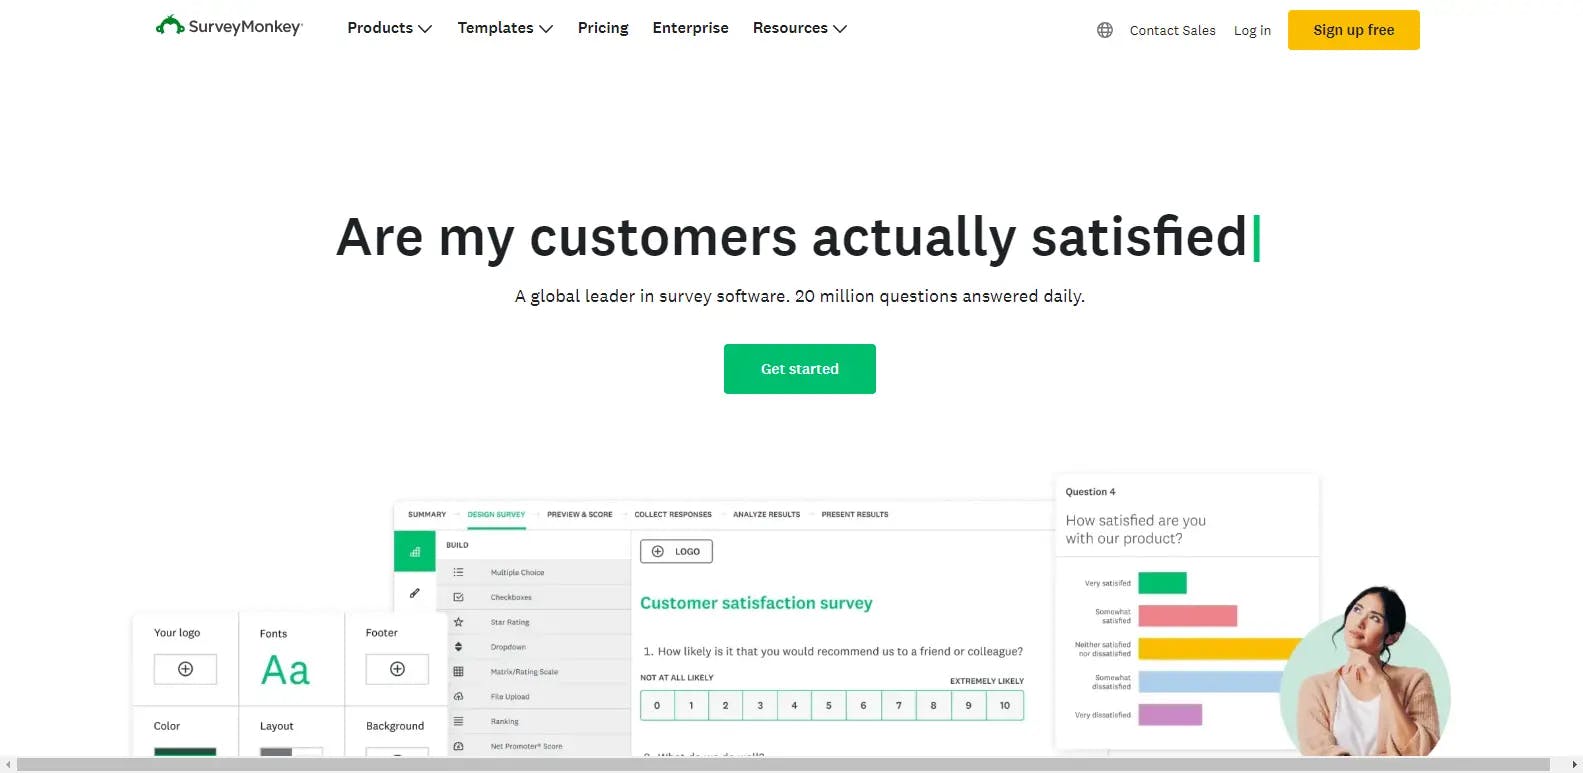 SurveyMonkey is the world's most popular online survey tool. It is one the top alternatives to Hotjar.